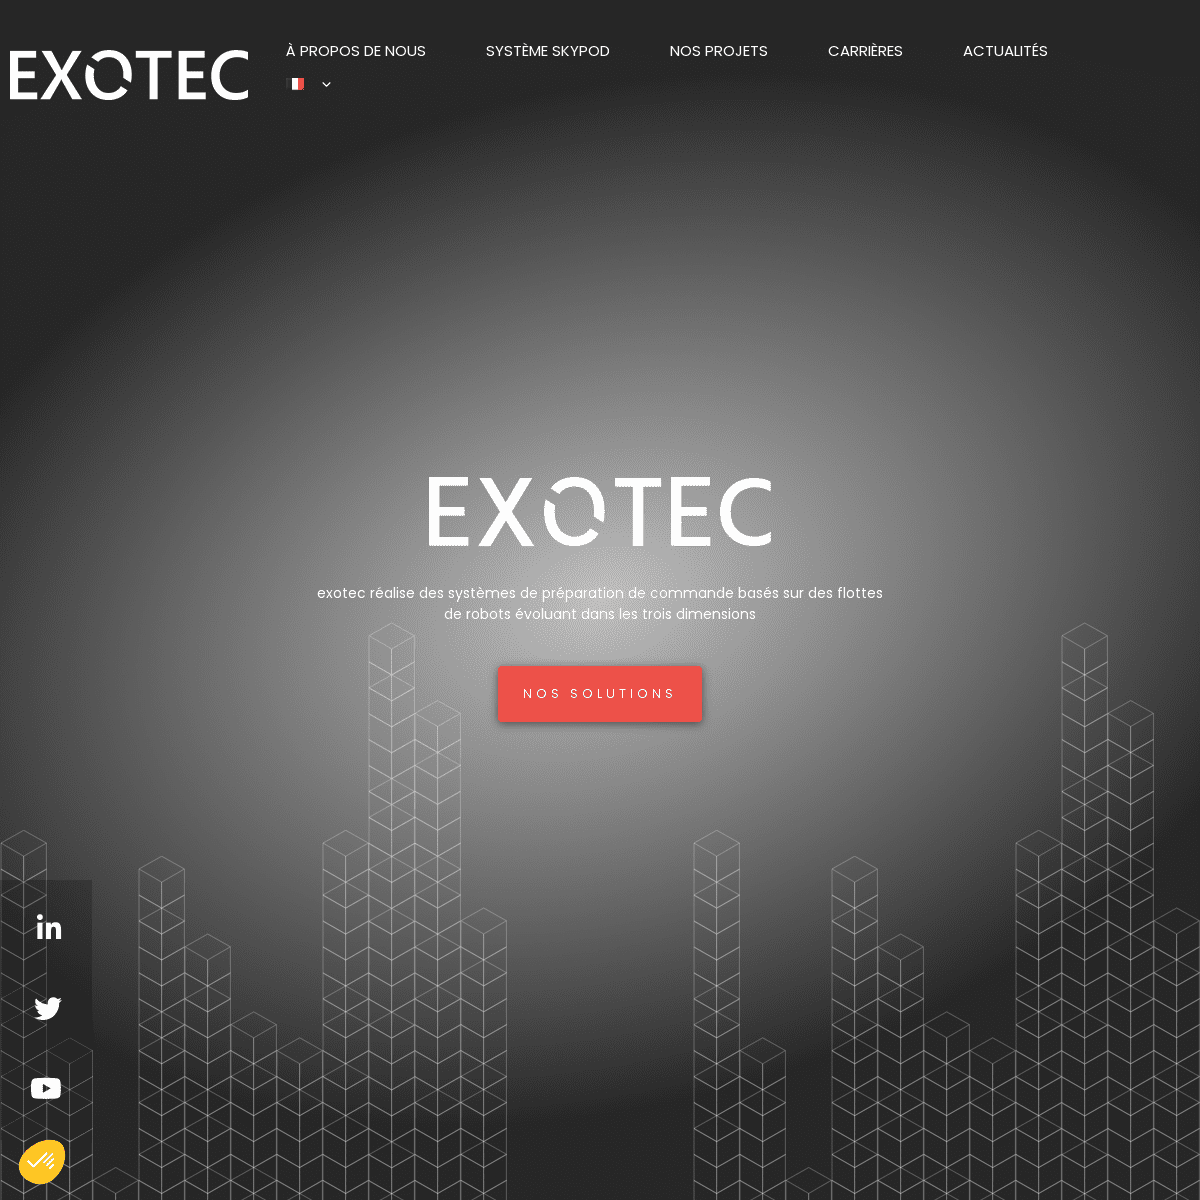 A complete backup of https://exotec.com